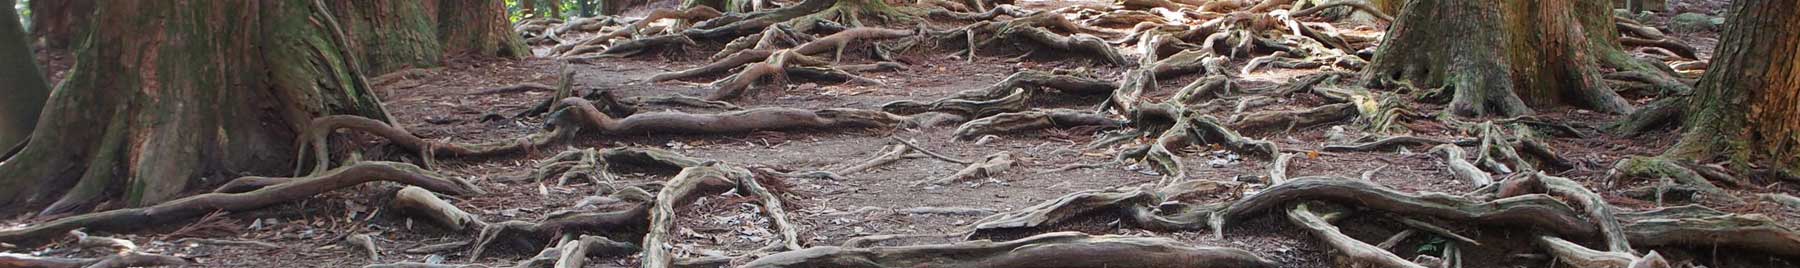 Roots on the floor of a dark forest